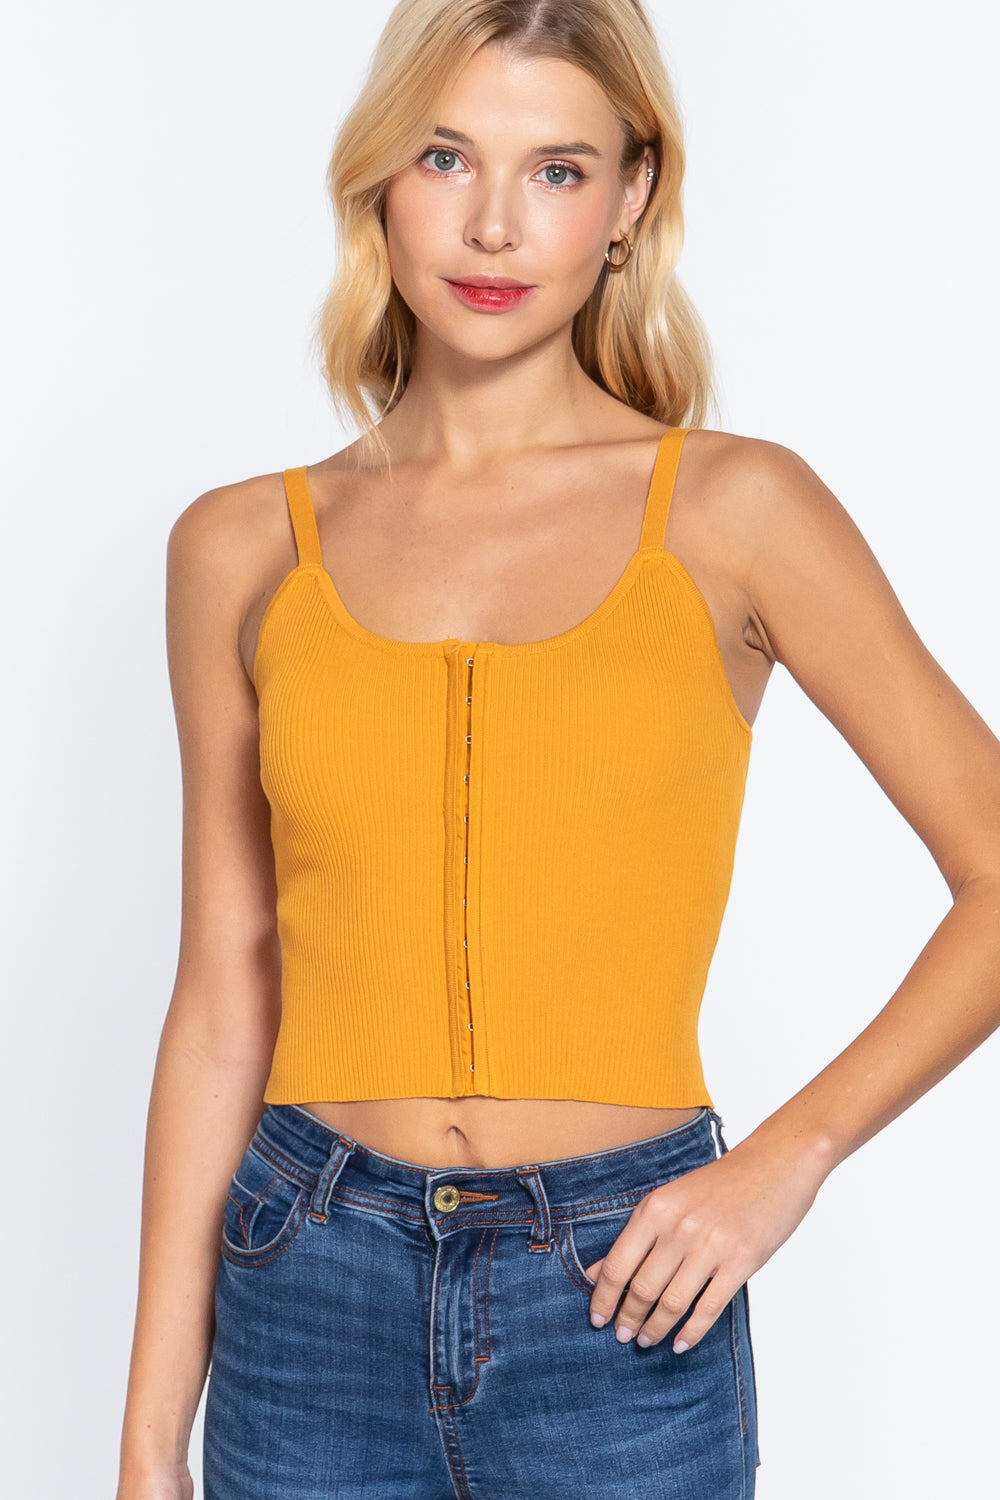 Front Closure Mango Yellow With Hooks Sweater Cami Top Shirts & Tops jehouze 